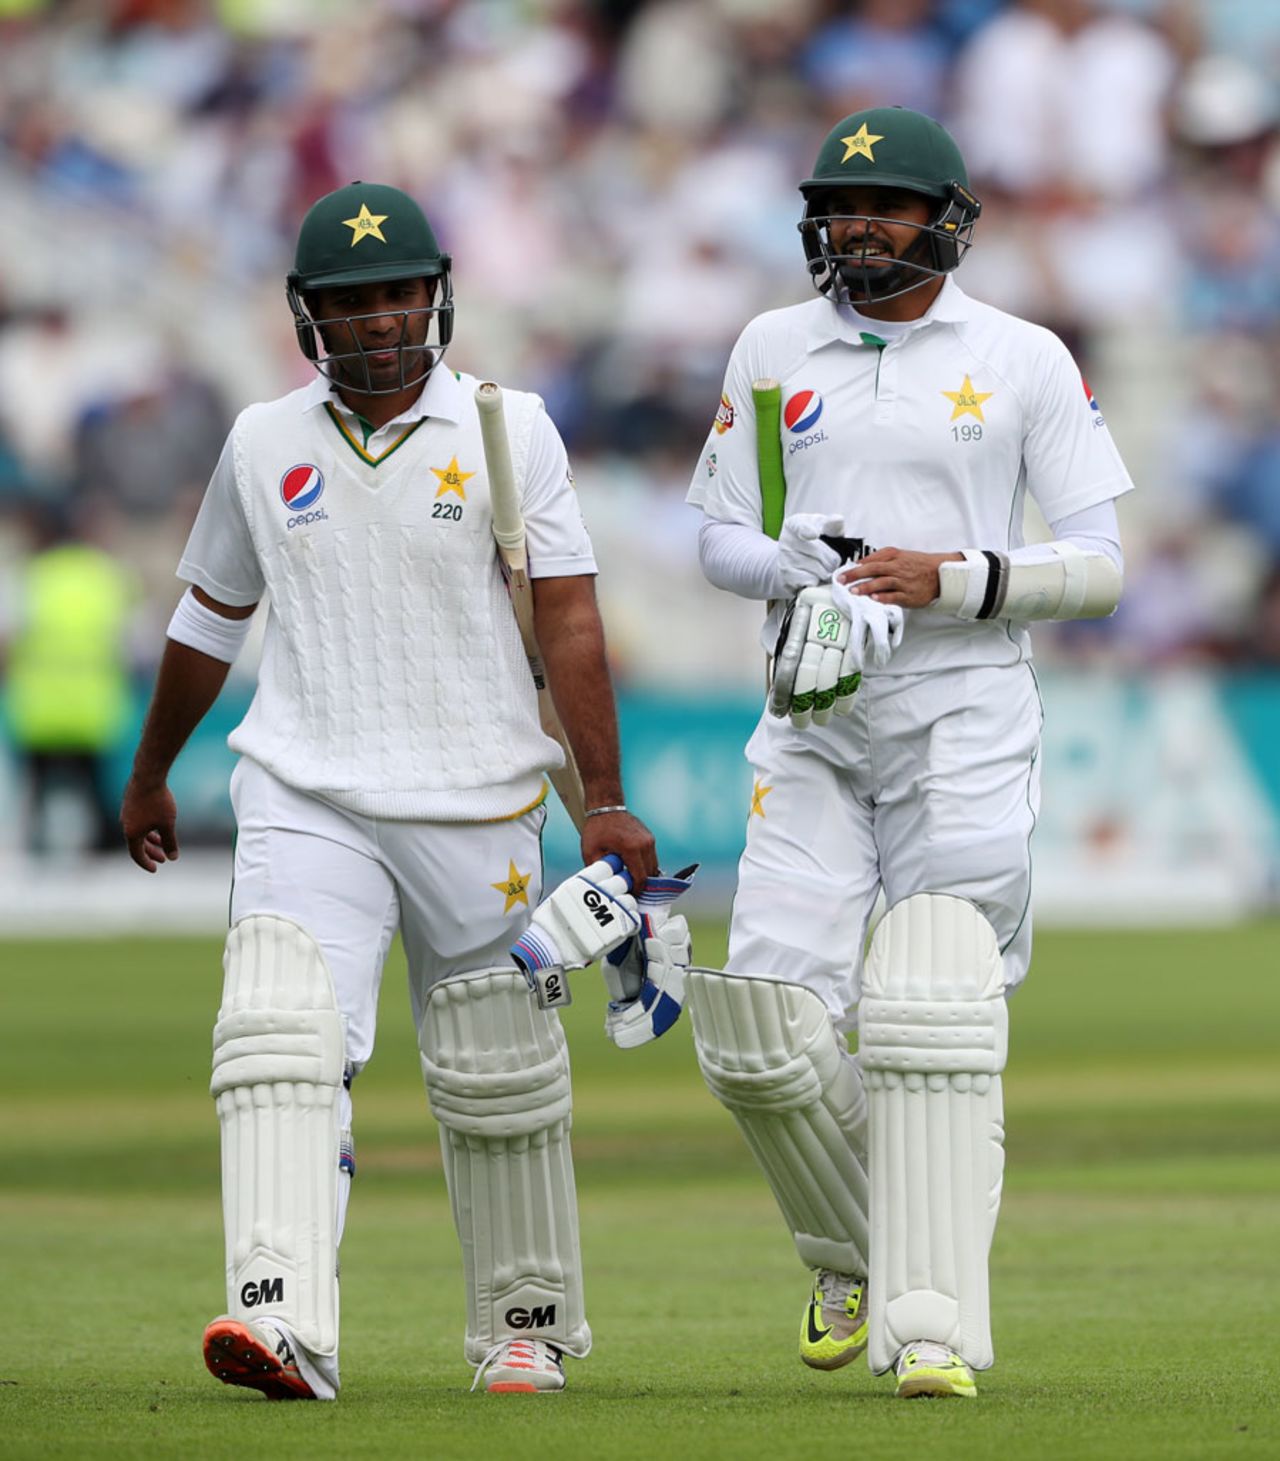 Sami Aslam and Azhar Ali batted through to lunch unscathed, England v Pakistan, 3rd Investec Test, Edgbaston, 2nd day, August 4, 2016